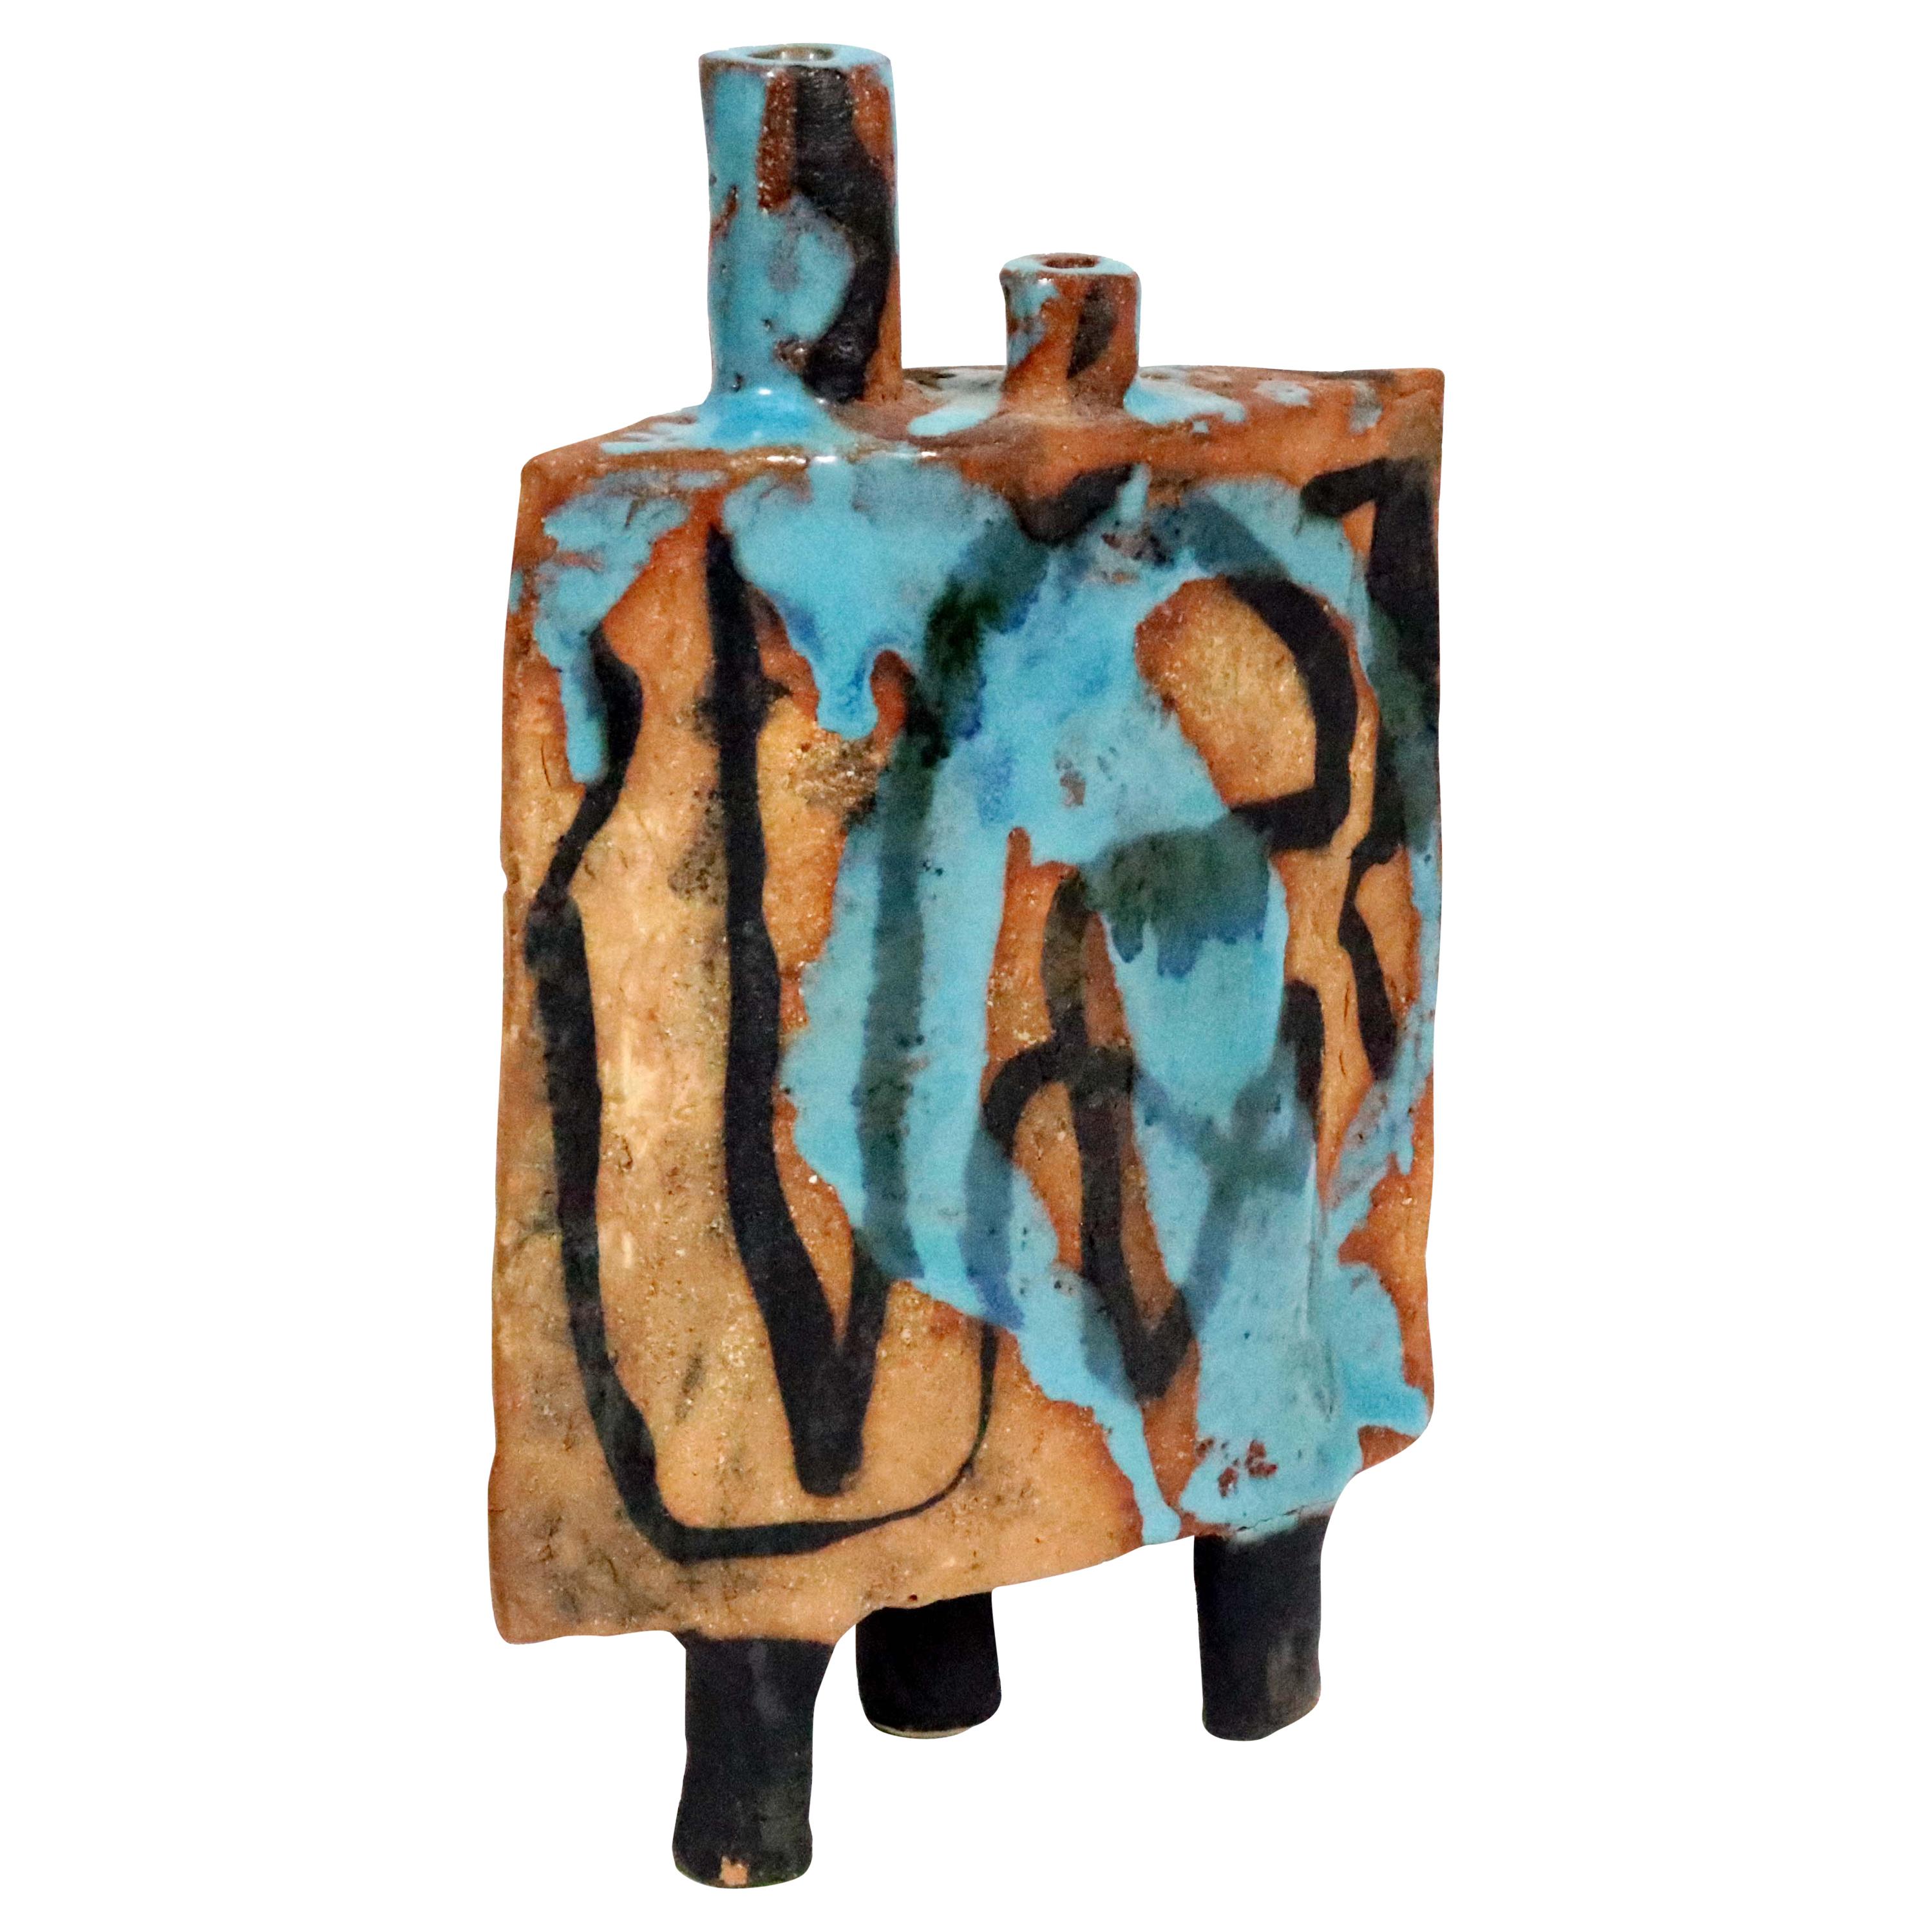 Midcentury Abstract Sculpture by California Studio Potter Win Ng